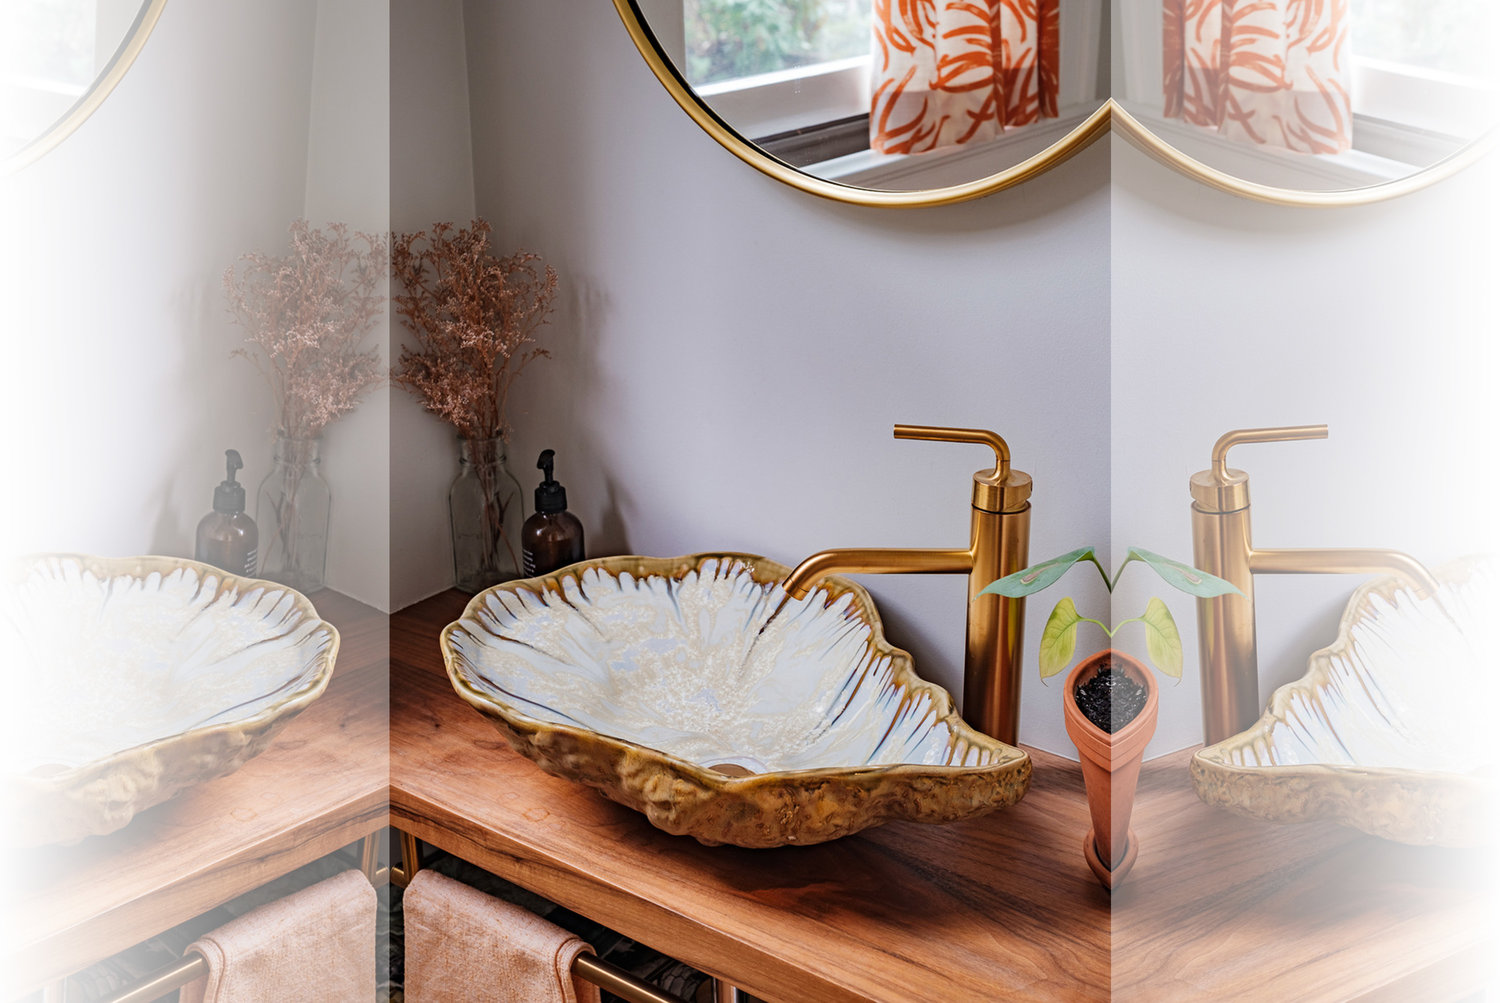 A hand-glazed ceramic oyster sink is a stand-out feature